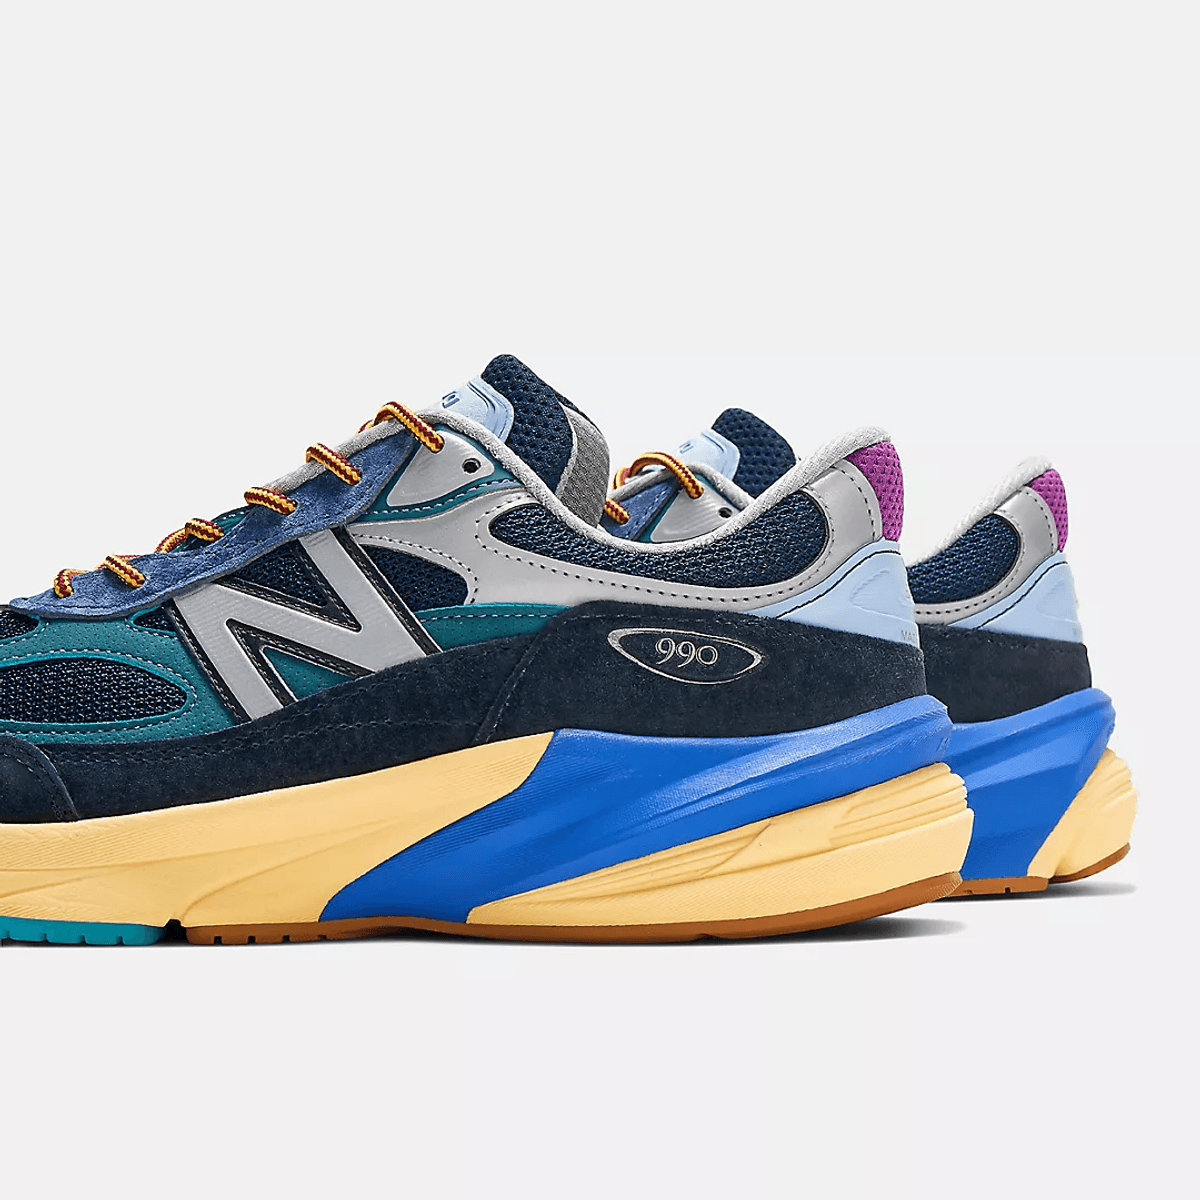 Action Bronson x New Balance 990v6 Lapis Lazuli Releases This Month